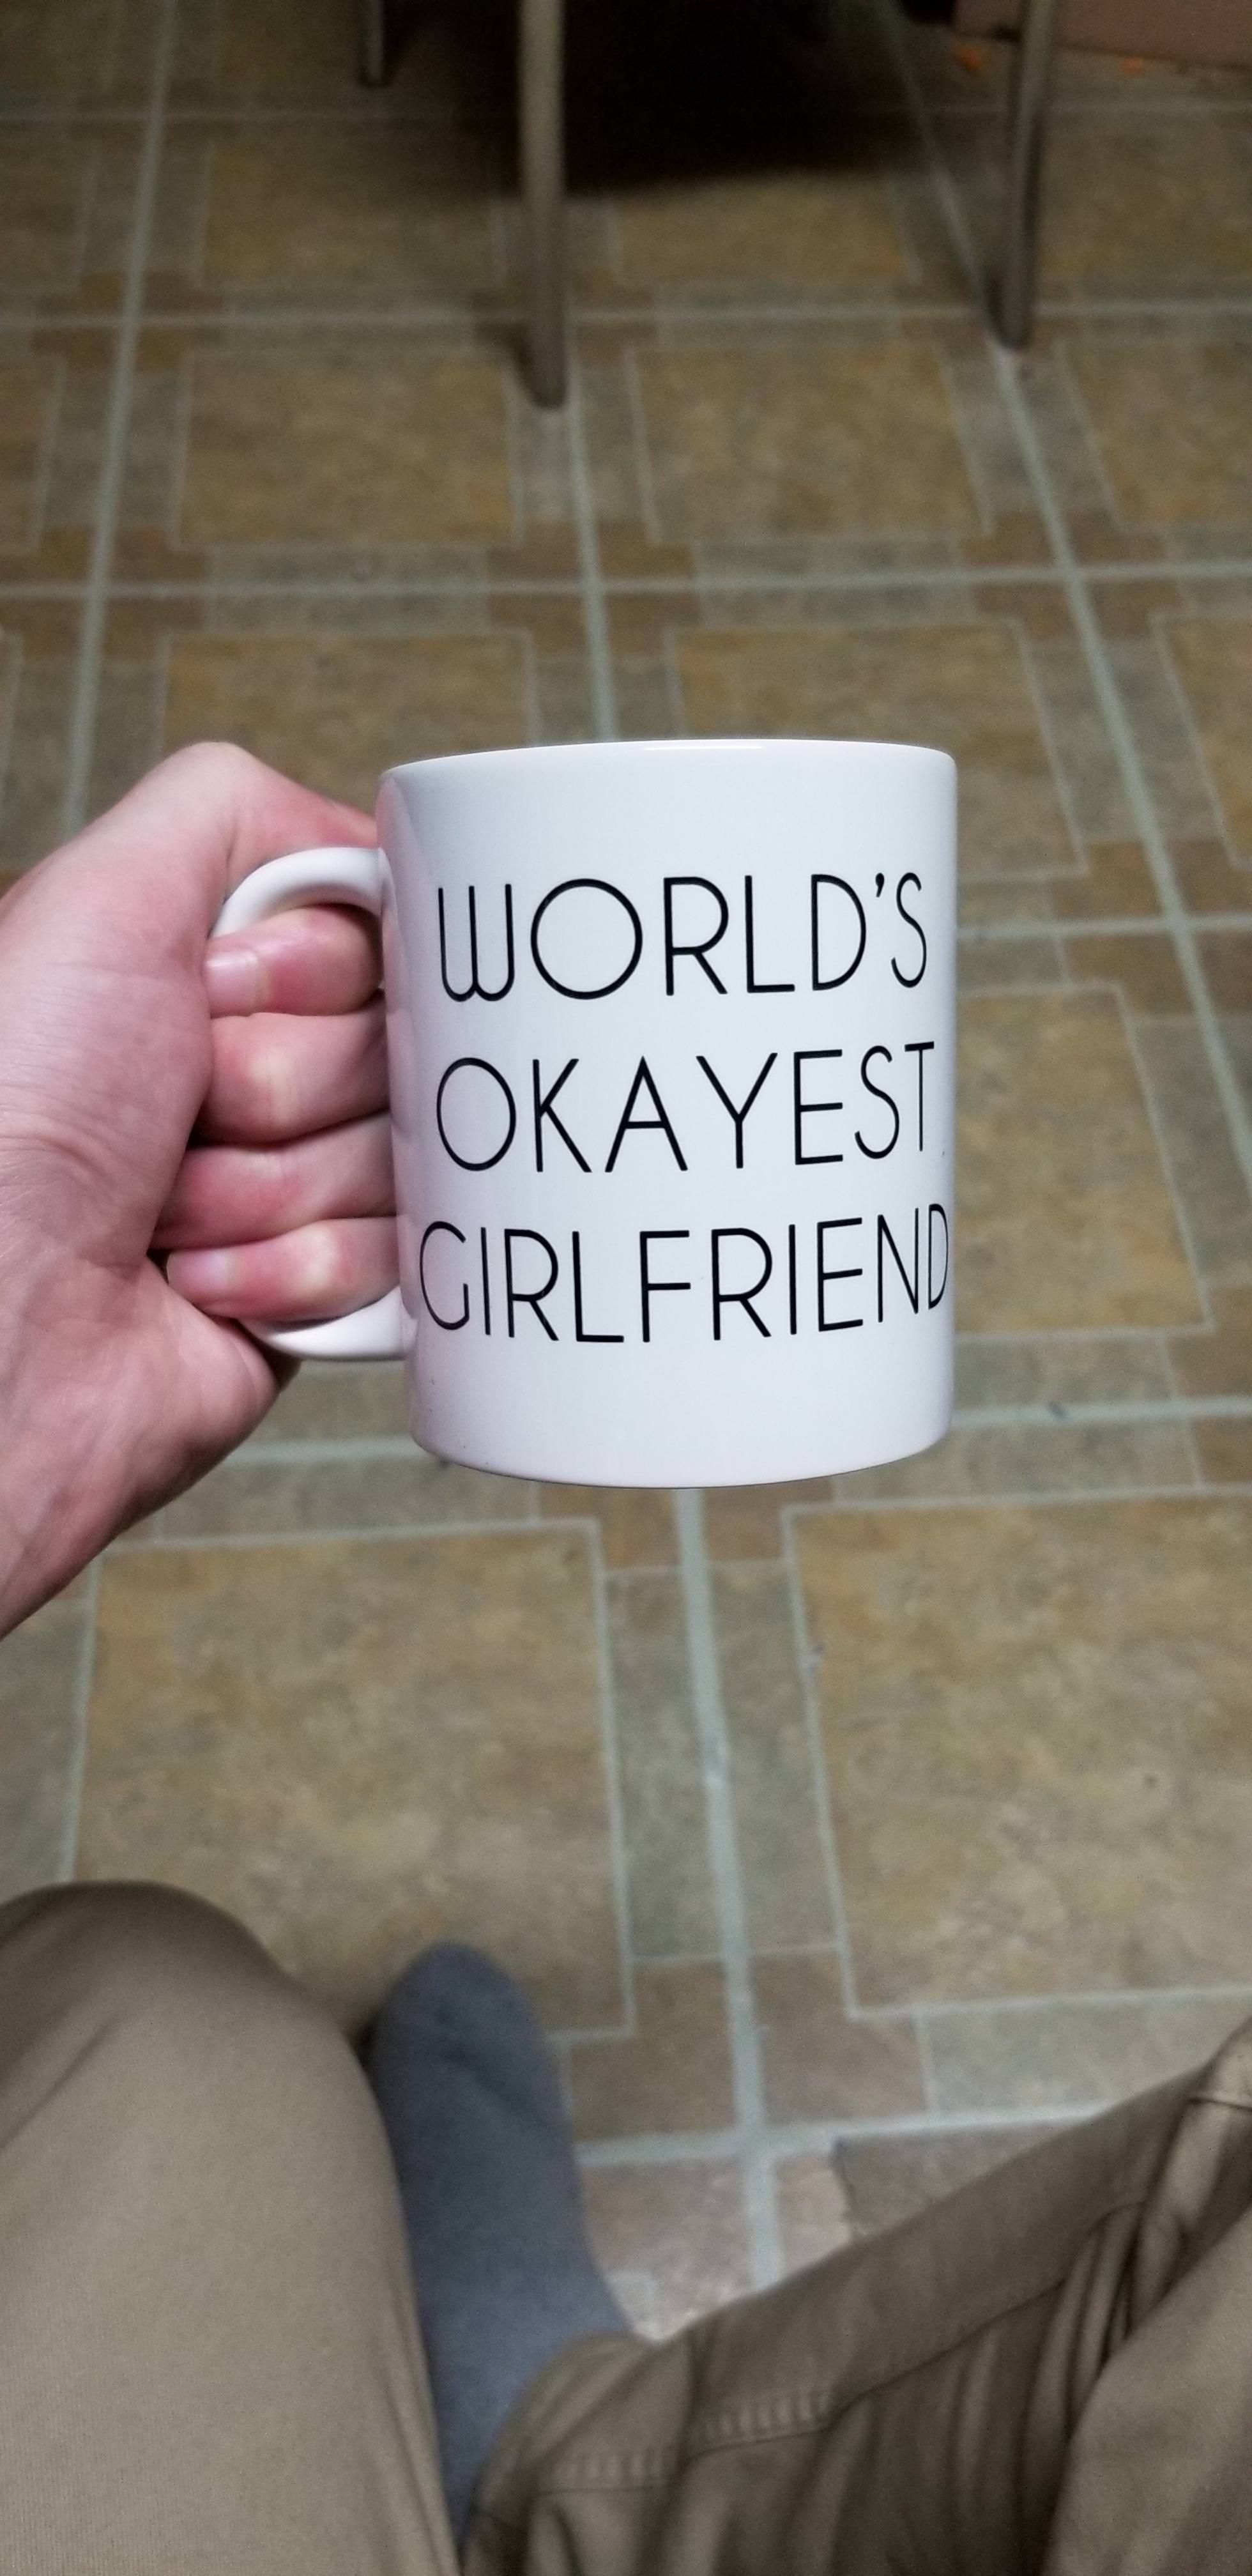 One of my girlfriends Christmas presents arrived today. Wish me luck.